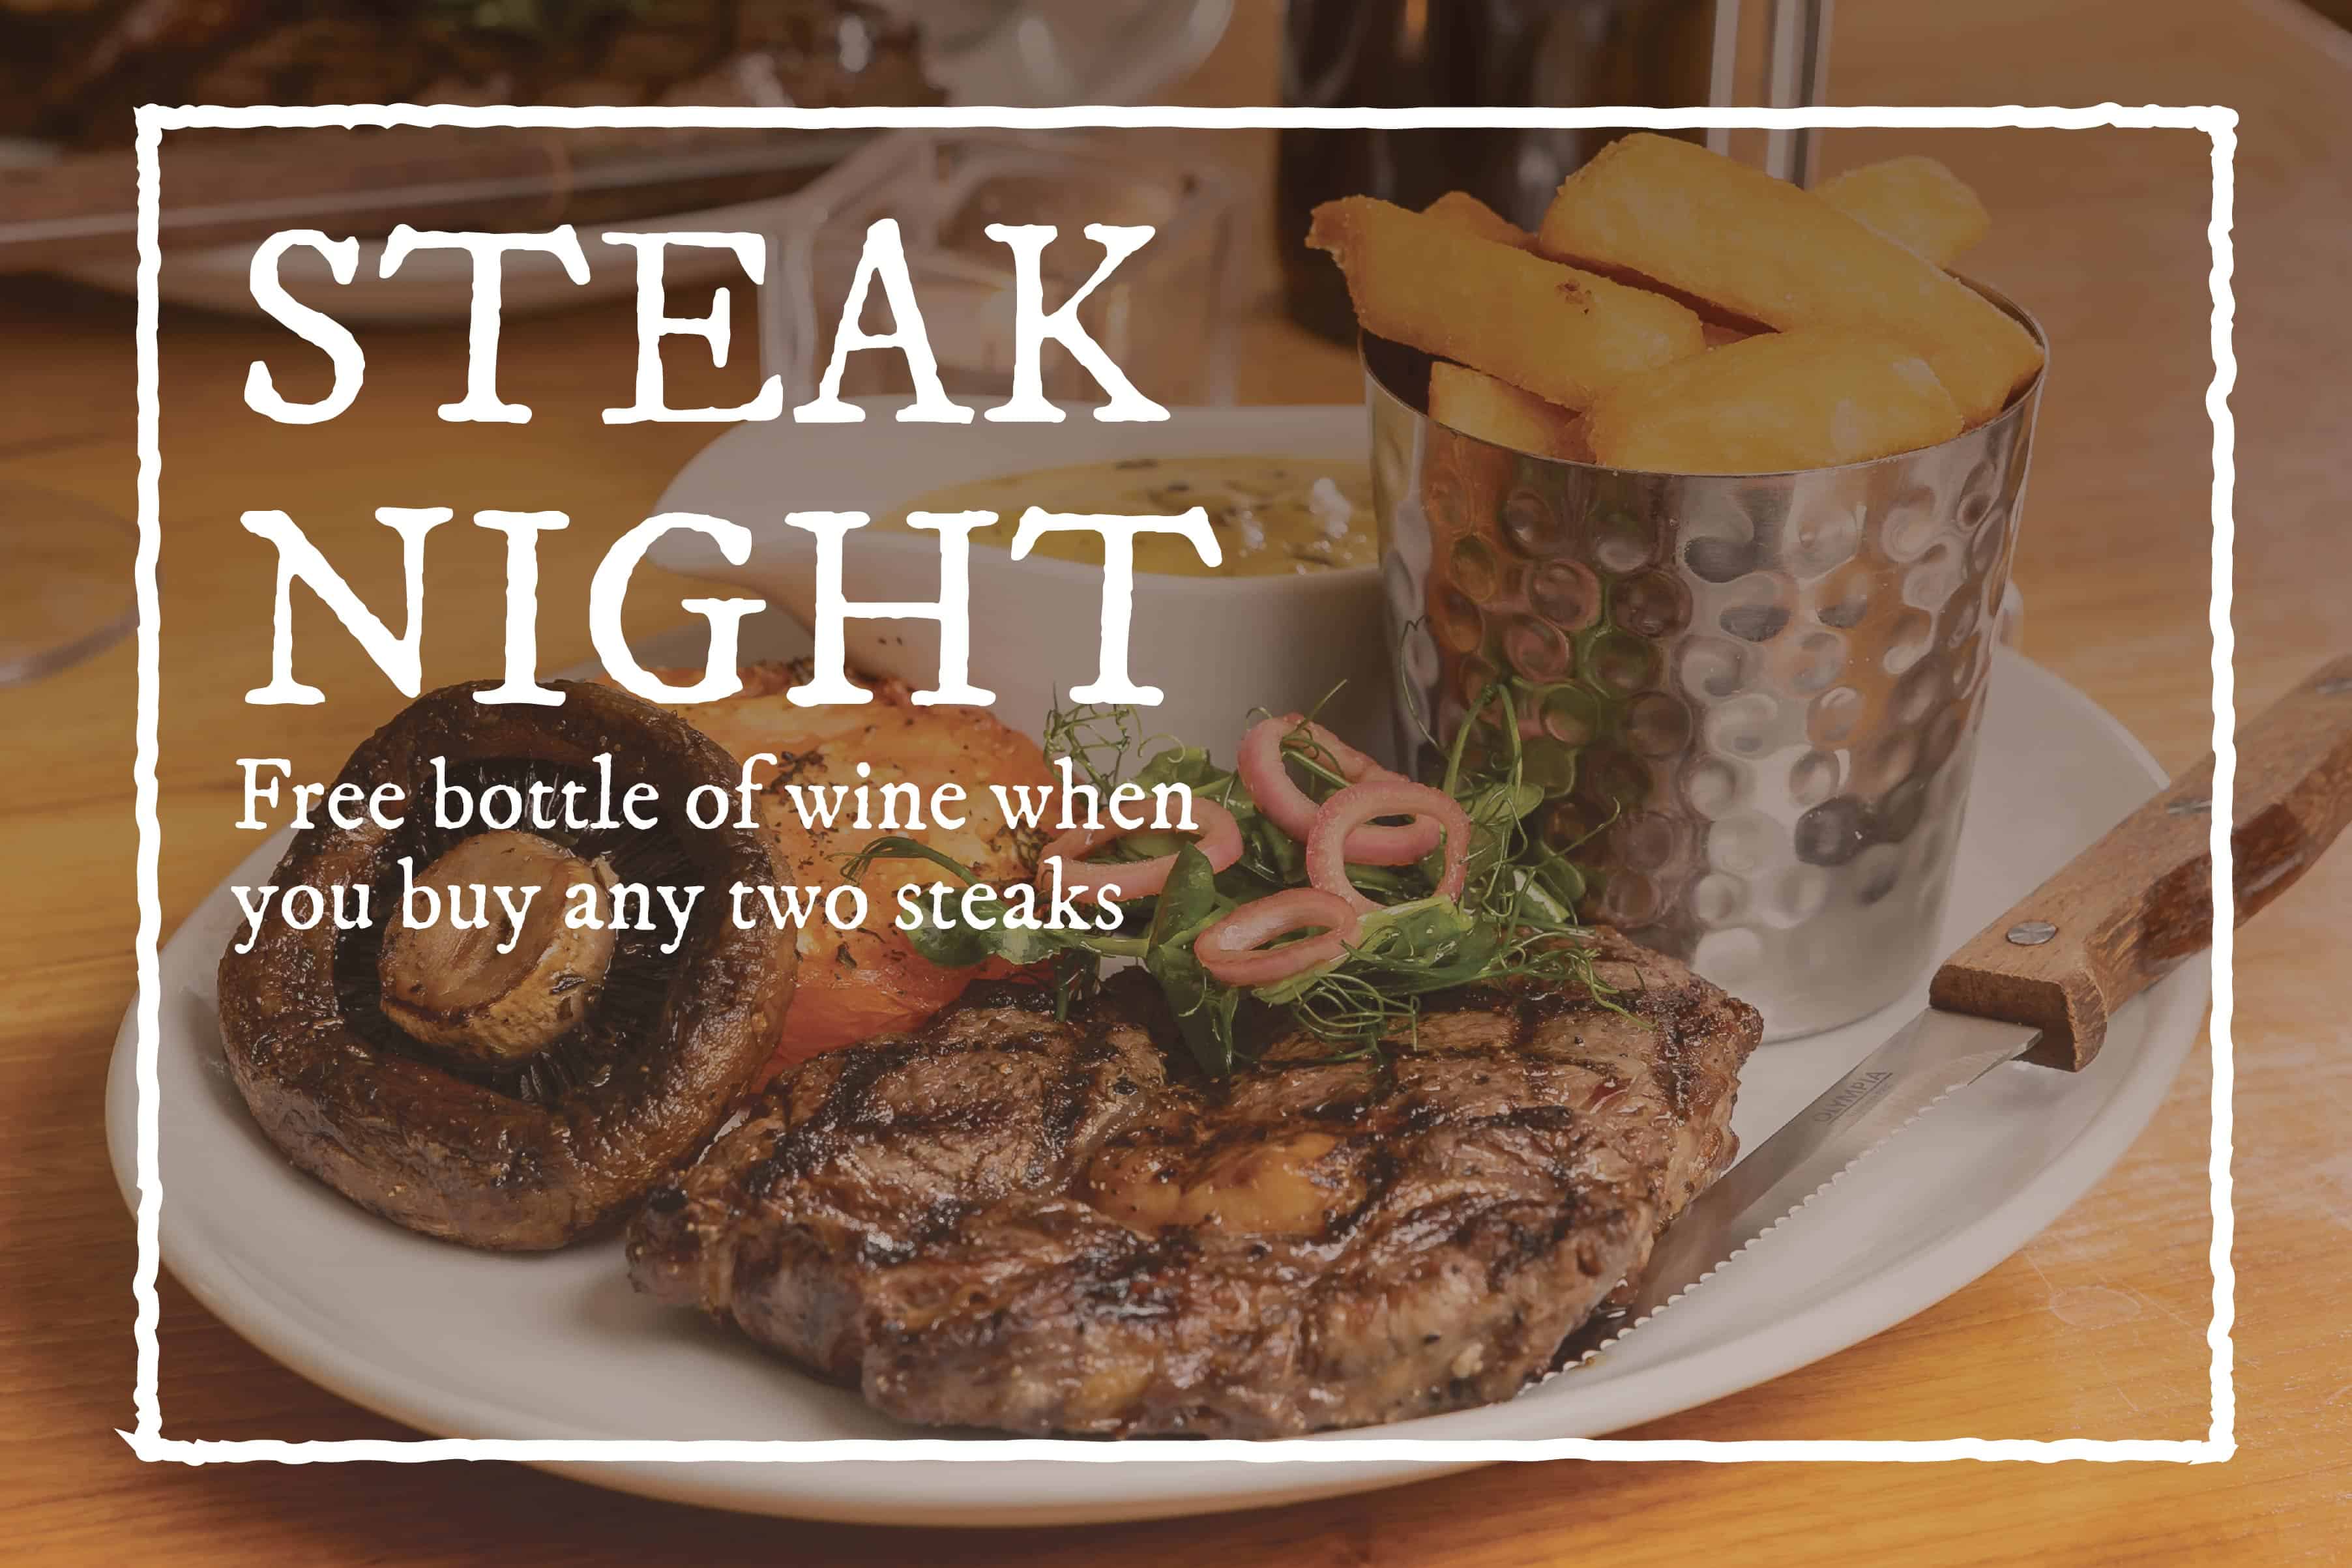 Steak Night on Thursday. 2 steaks and get a free bottle of wine.